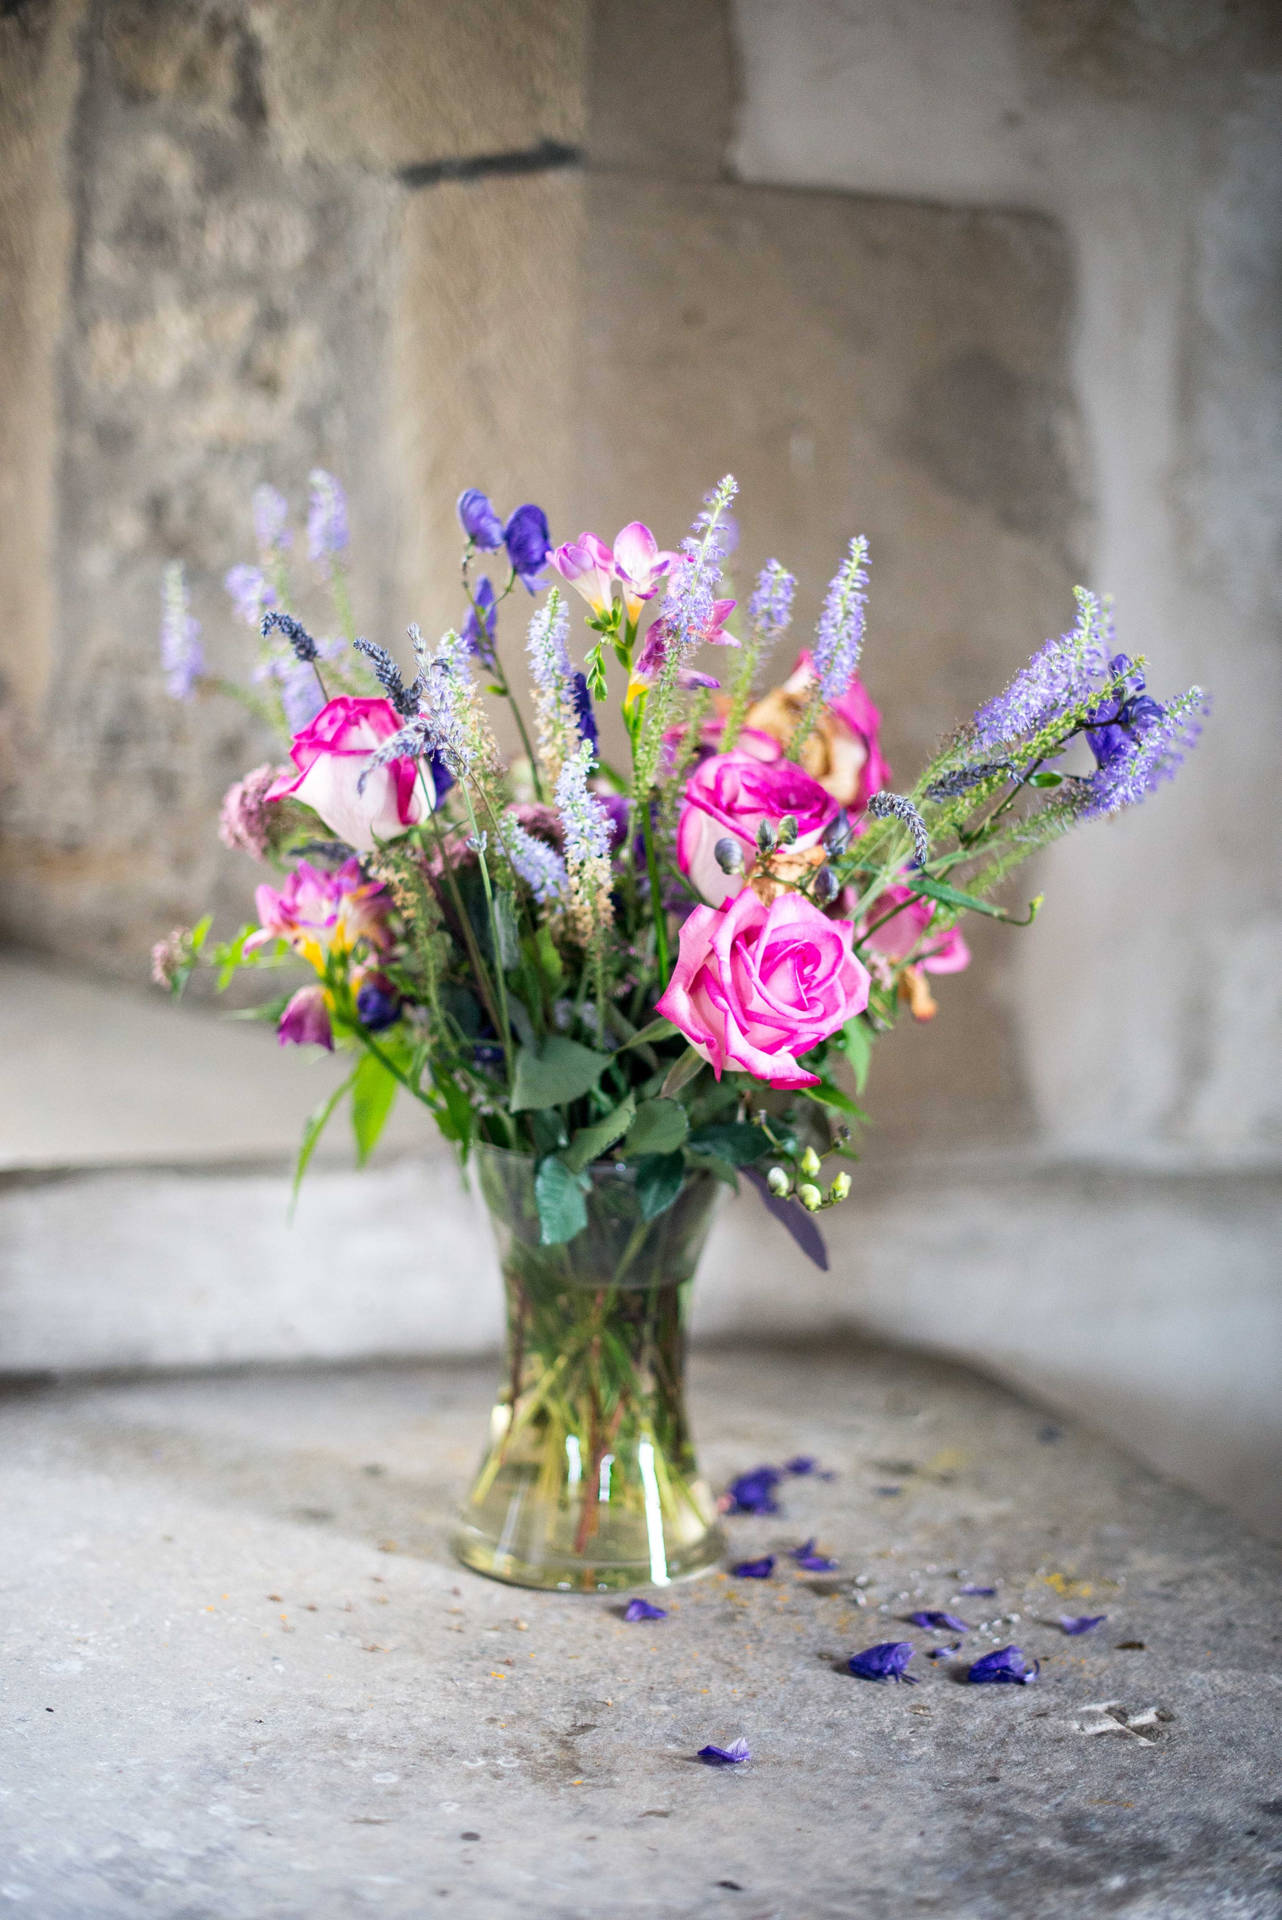 A Bouquet of Rose and Lavender in an Outdoor Vase Wallpaper